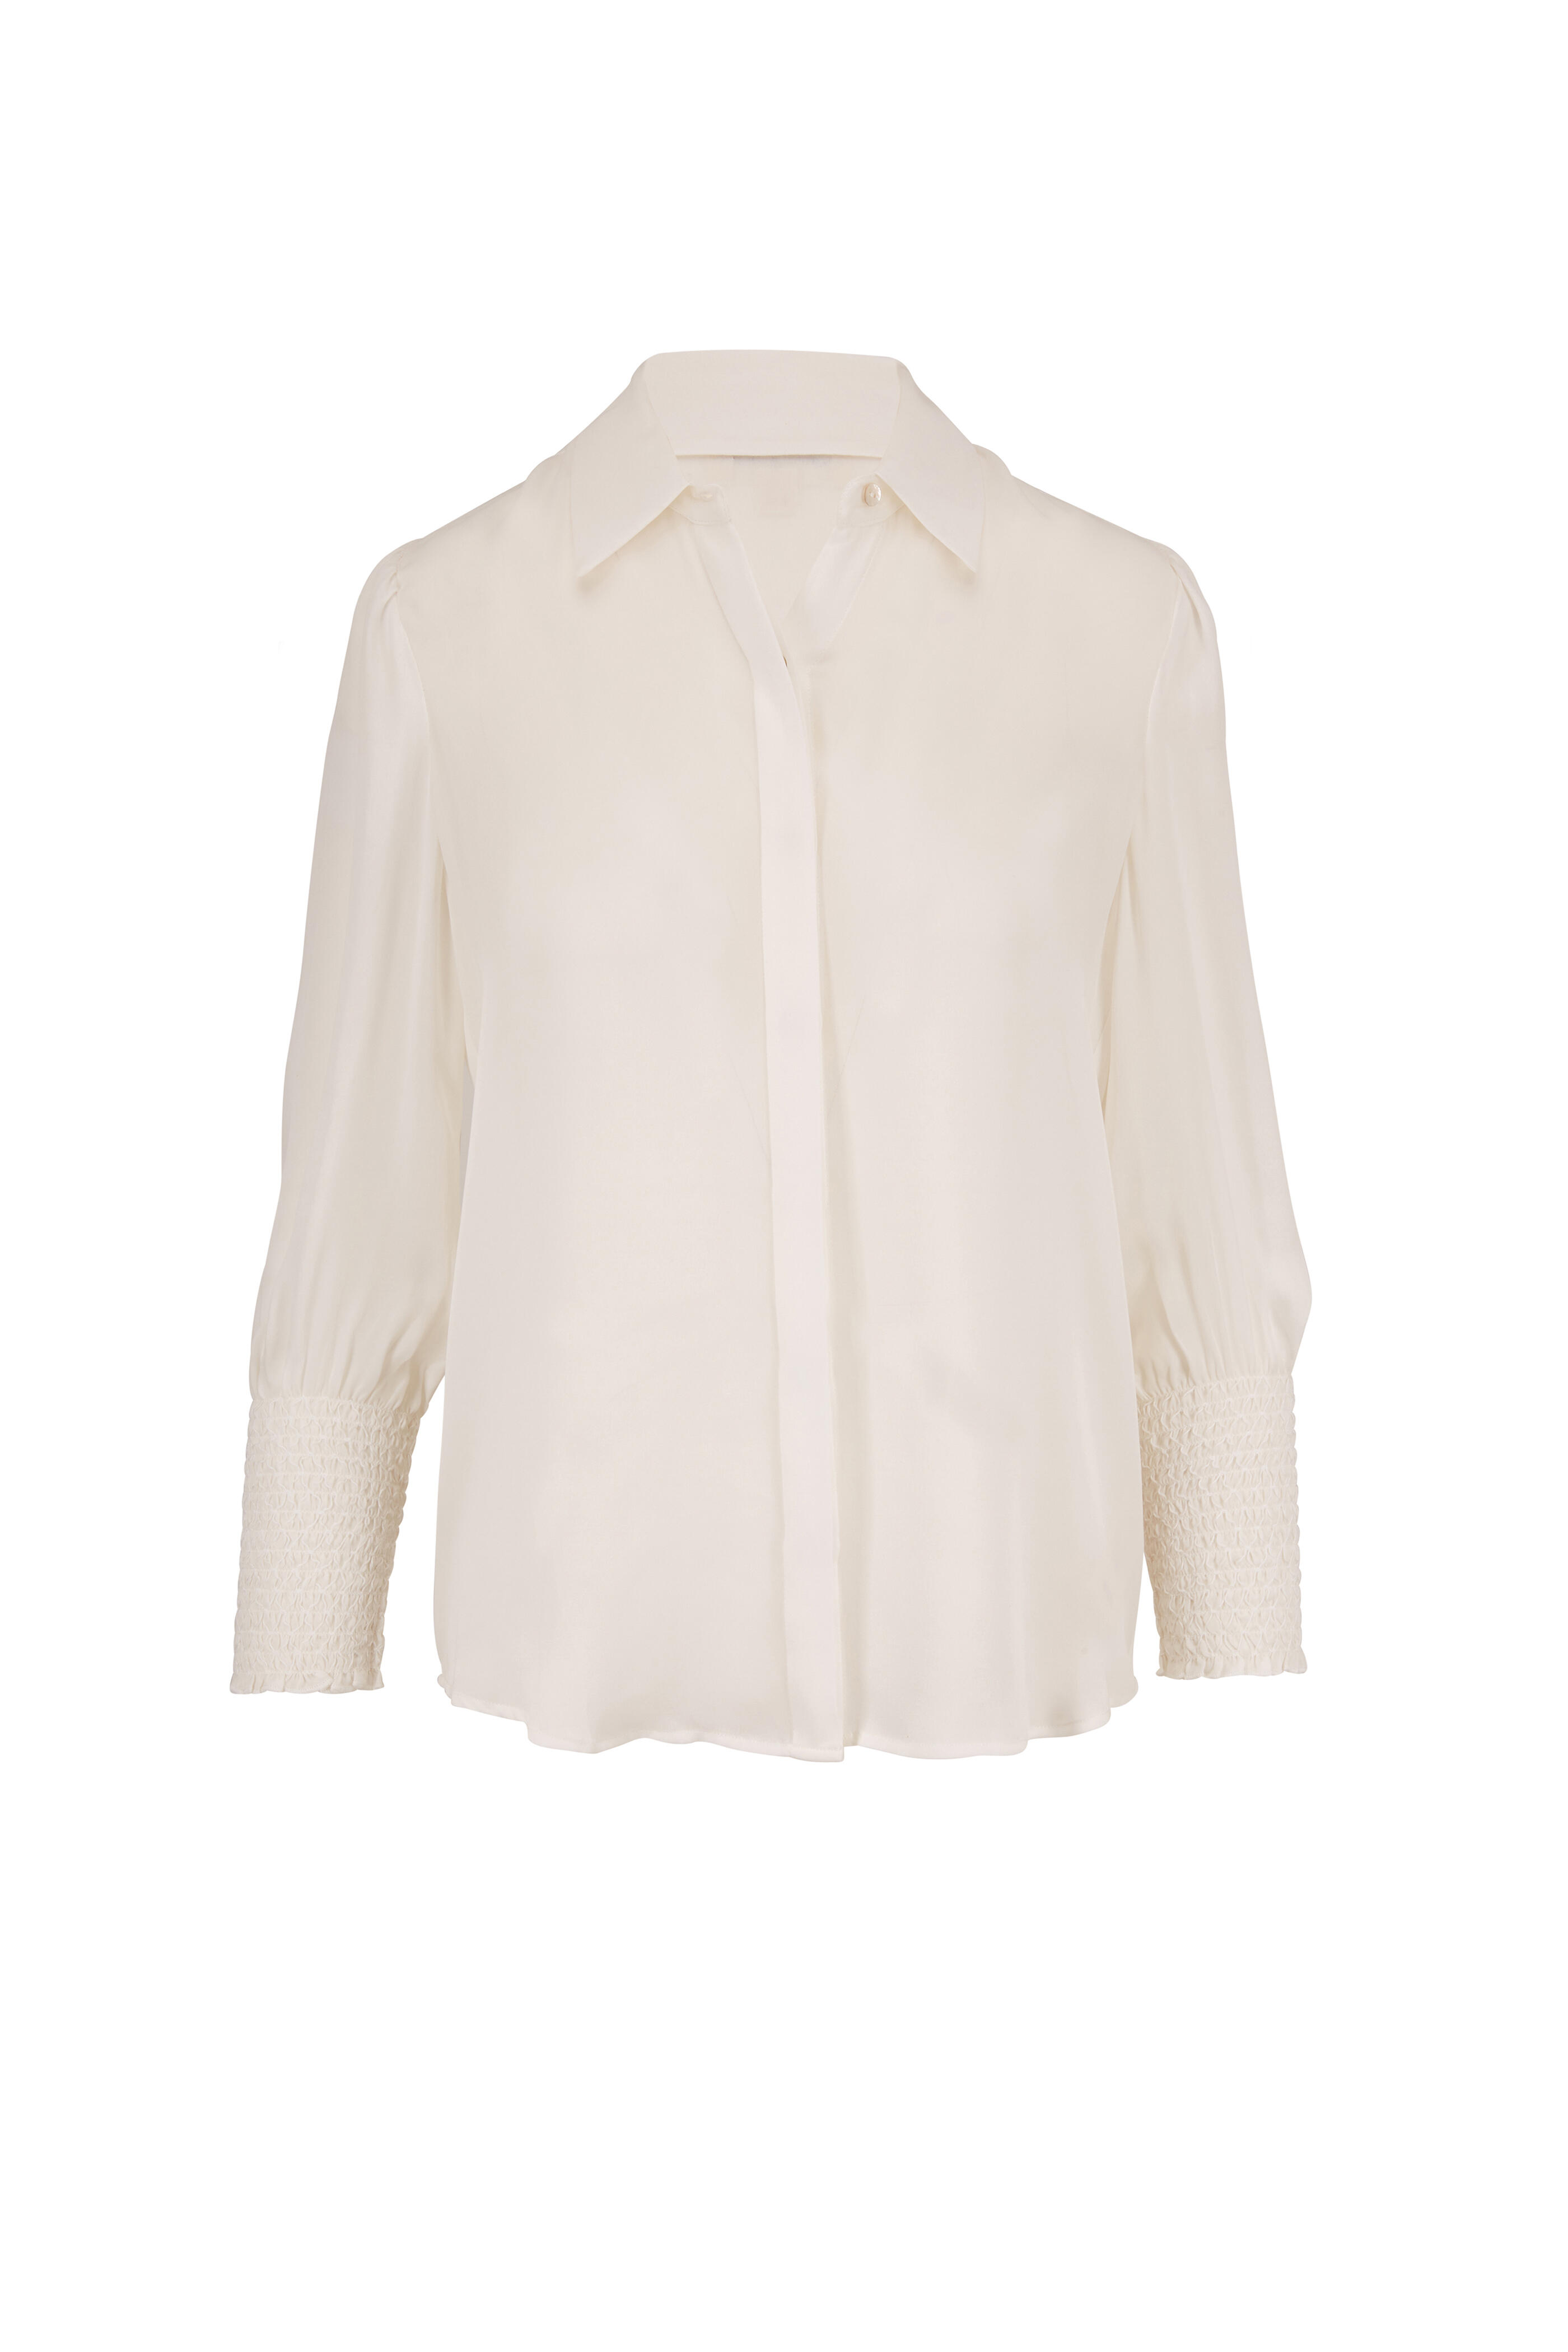 L'AGENCE Bianca Blouse in Marzipan